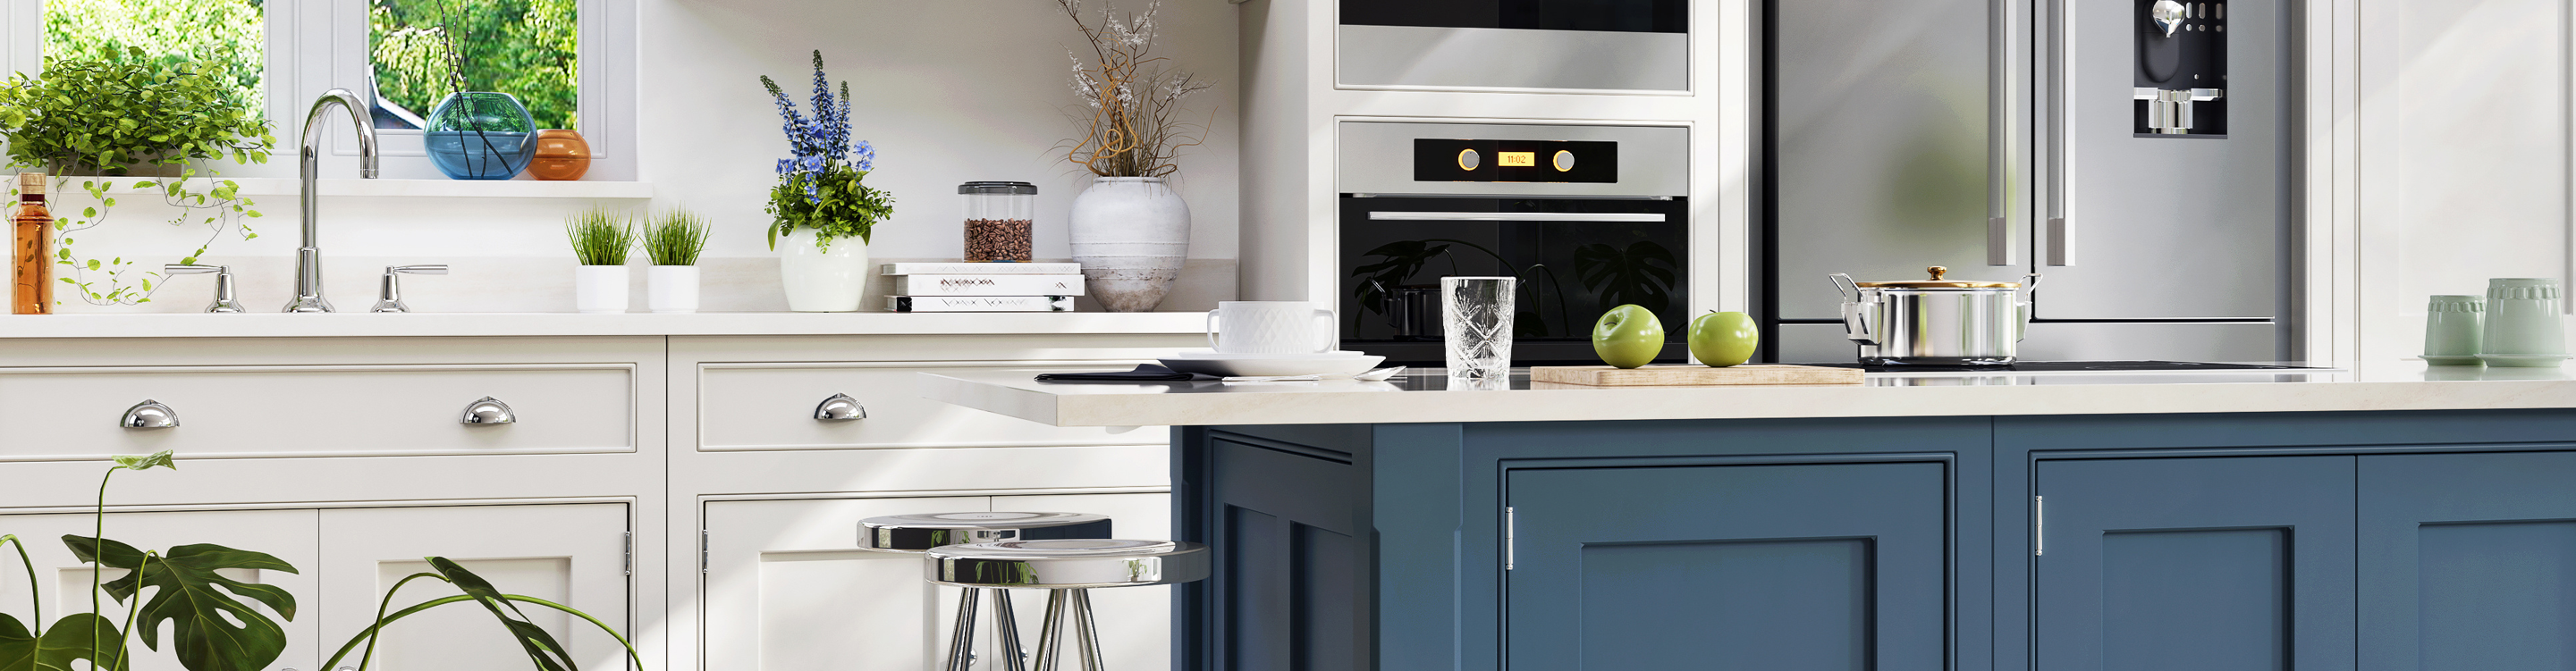 white kitchen cabinets with blue island in kitchen with black and white tile